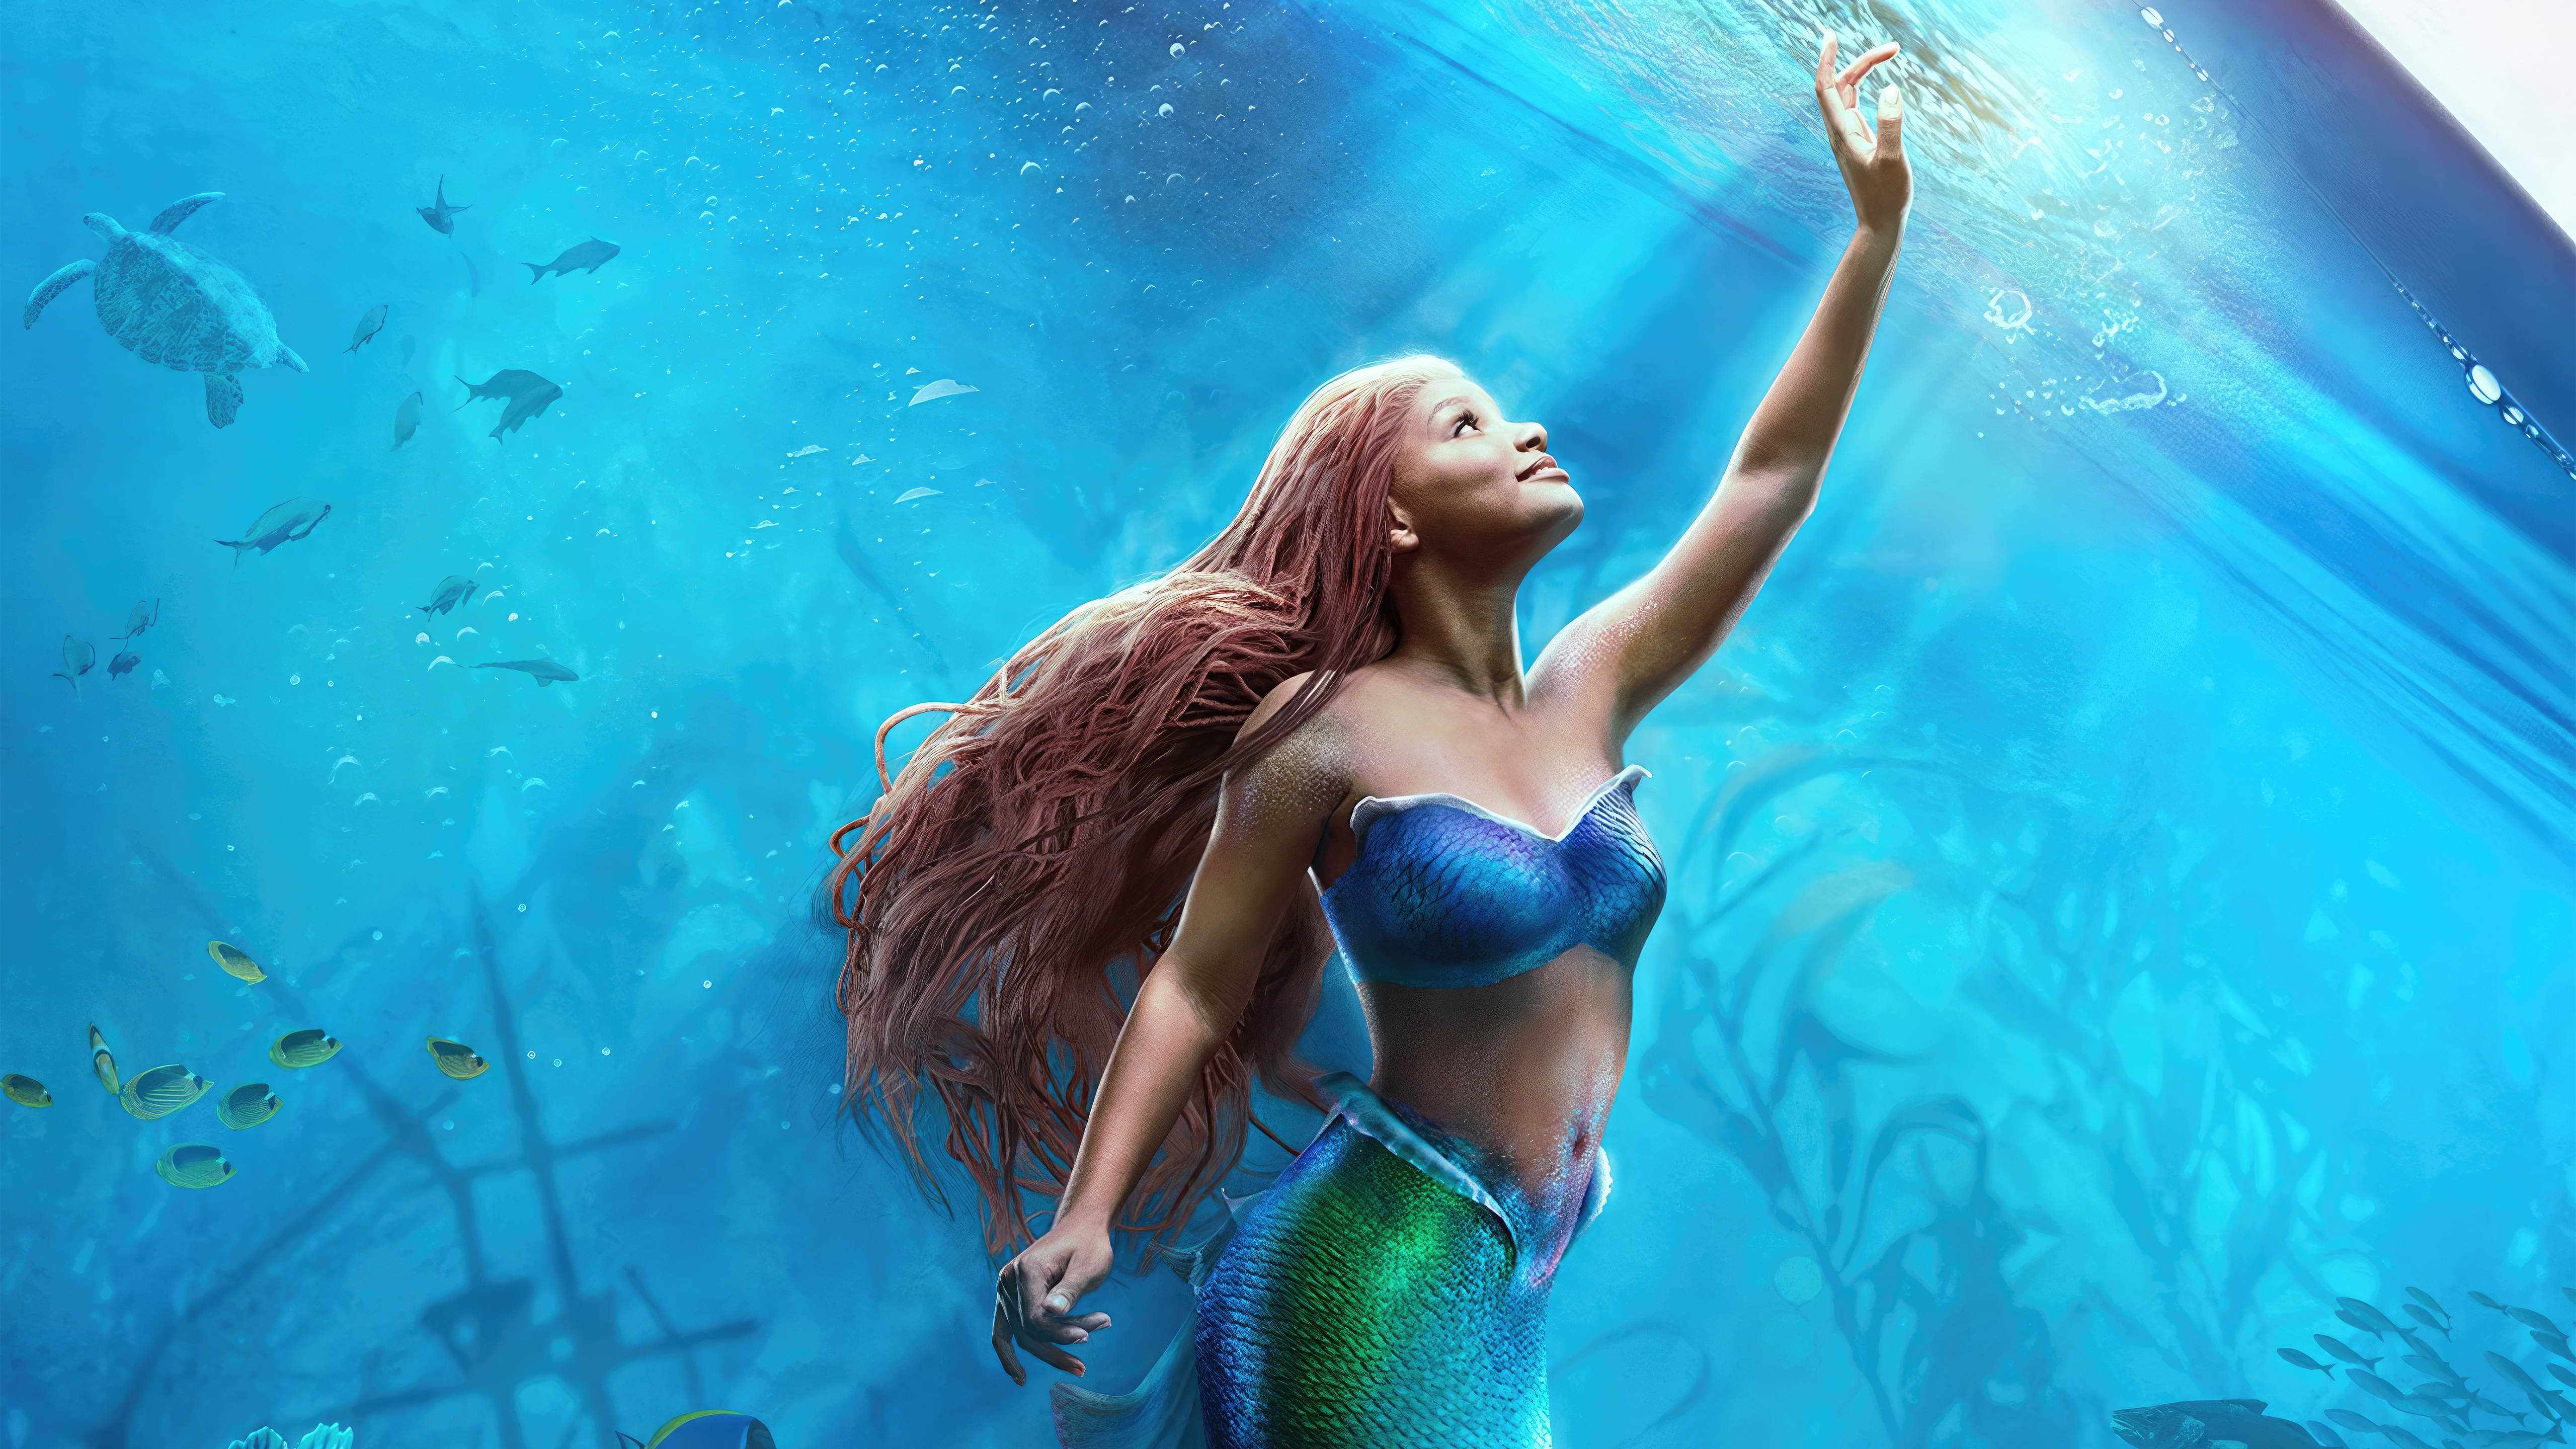 Ariel The Little Mermaid Movie HD Movies 4k Wallpapers Images  Backgrounds Photos and Pictures